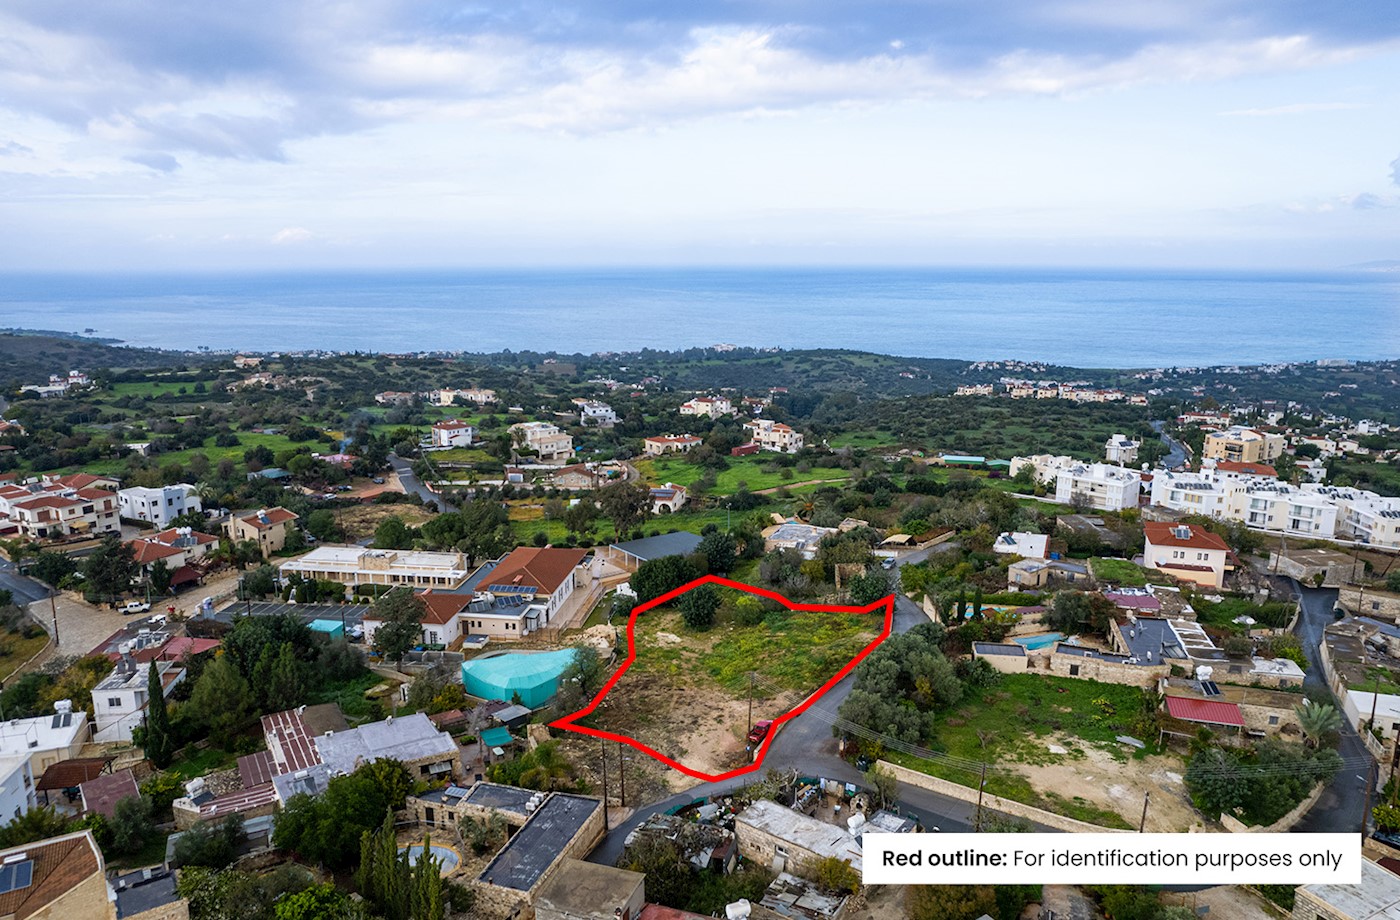 Residential field in Neo Chorio, Paphos 1/5